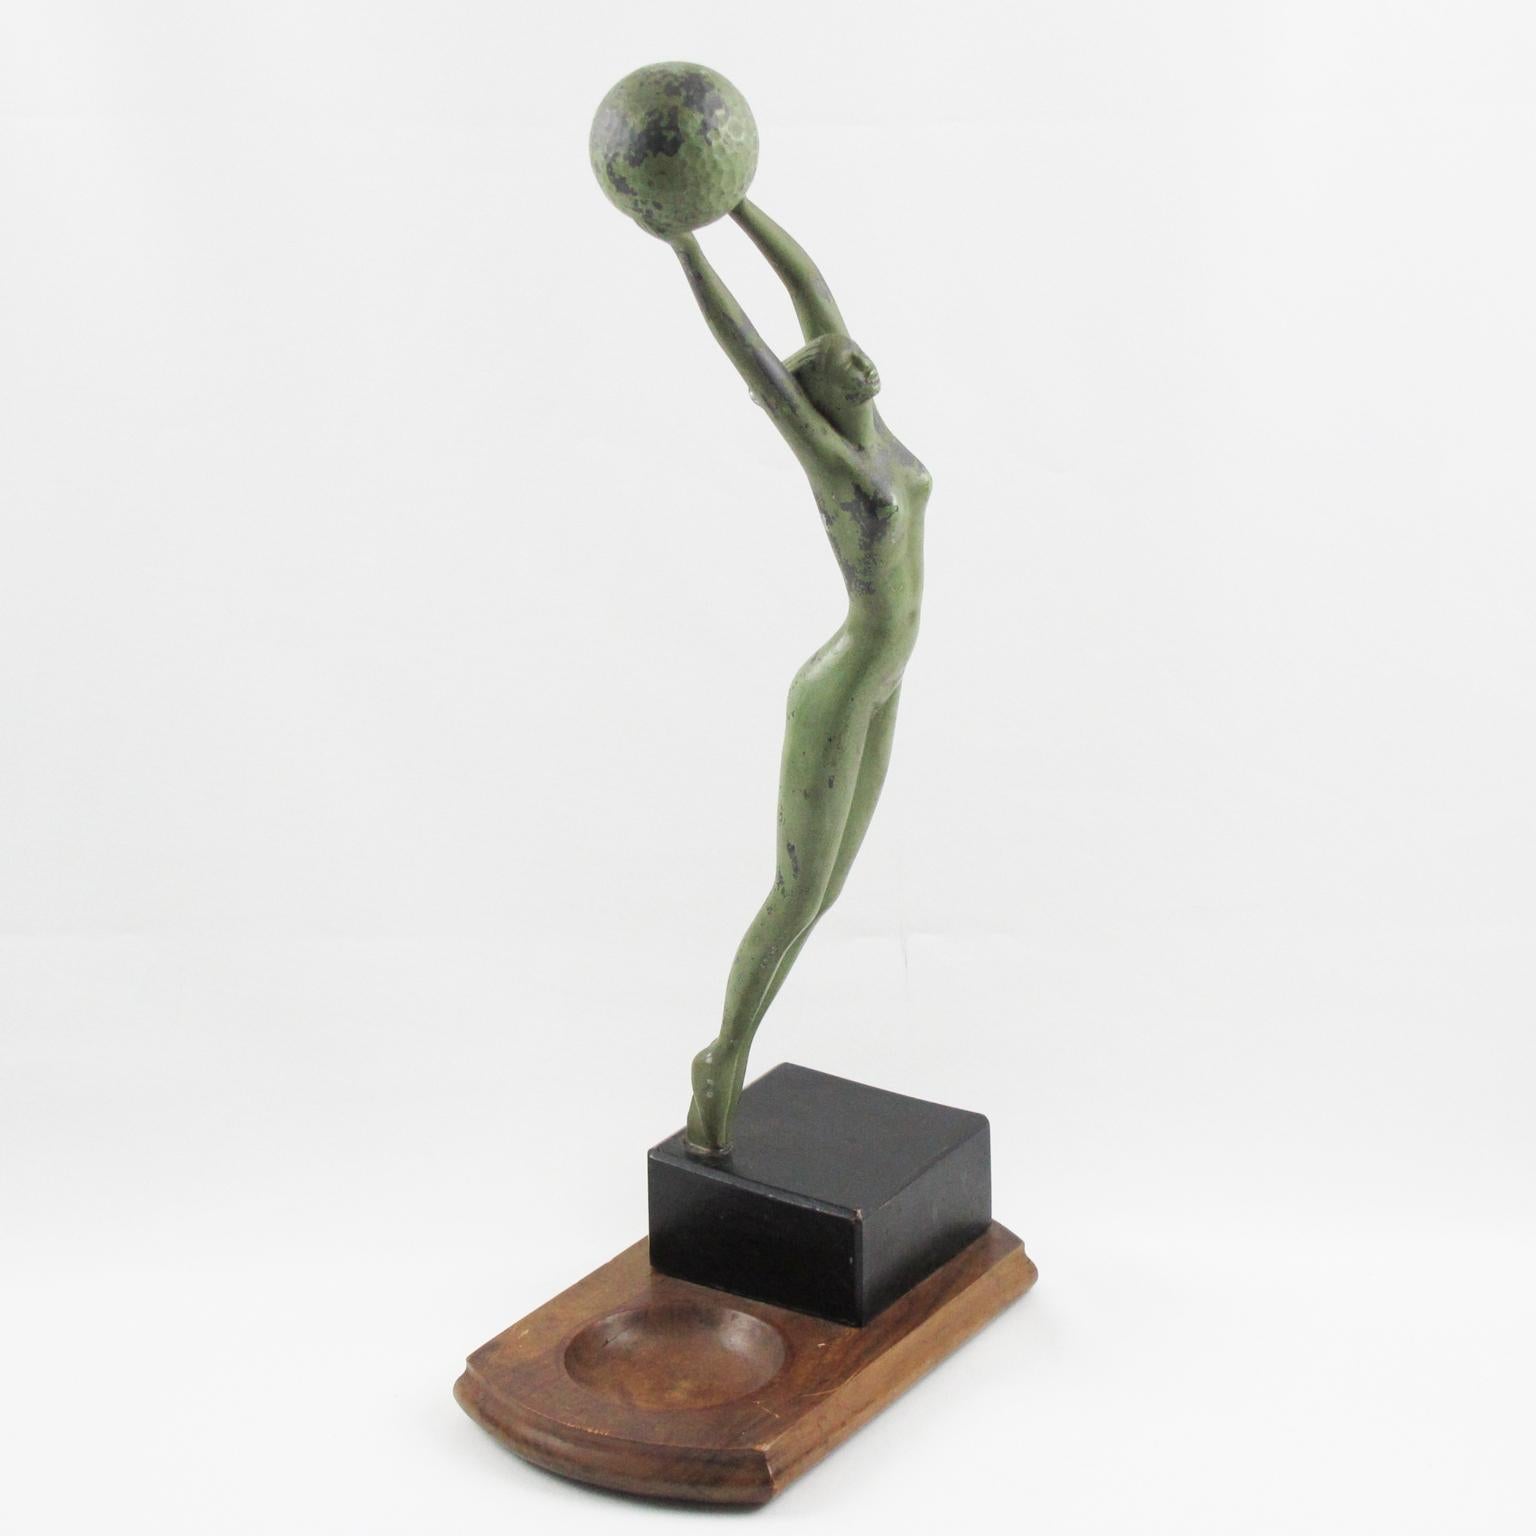 Elegant metal sculpture, statuette signed on base. Finely carved bare slim naked woman in a typical Art Deco period design, holding a golf ball. The figurine is made of white metal with an original green patina. Desk tidy base in natural walnut wood